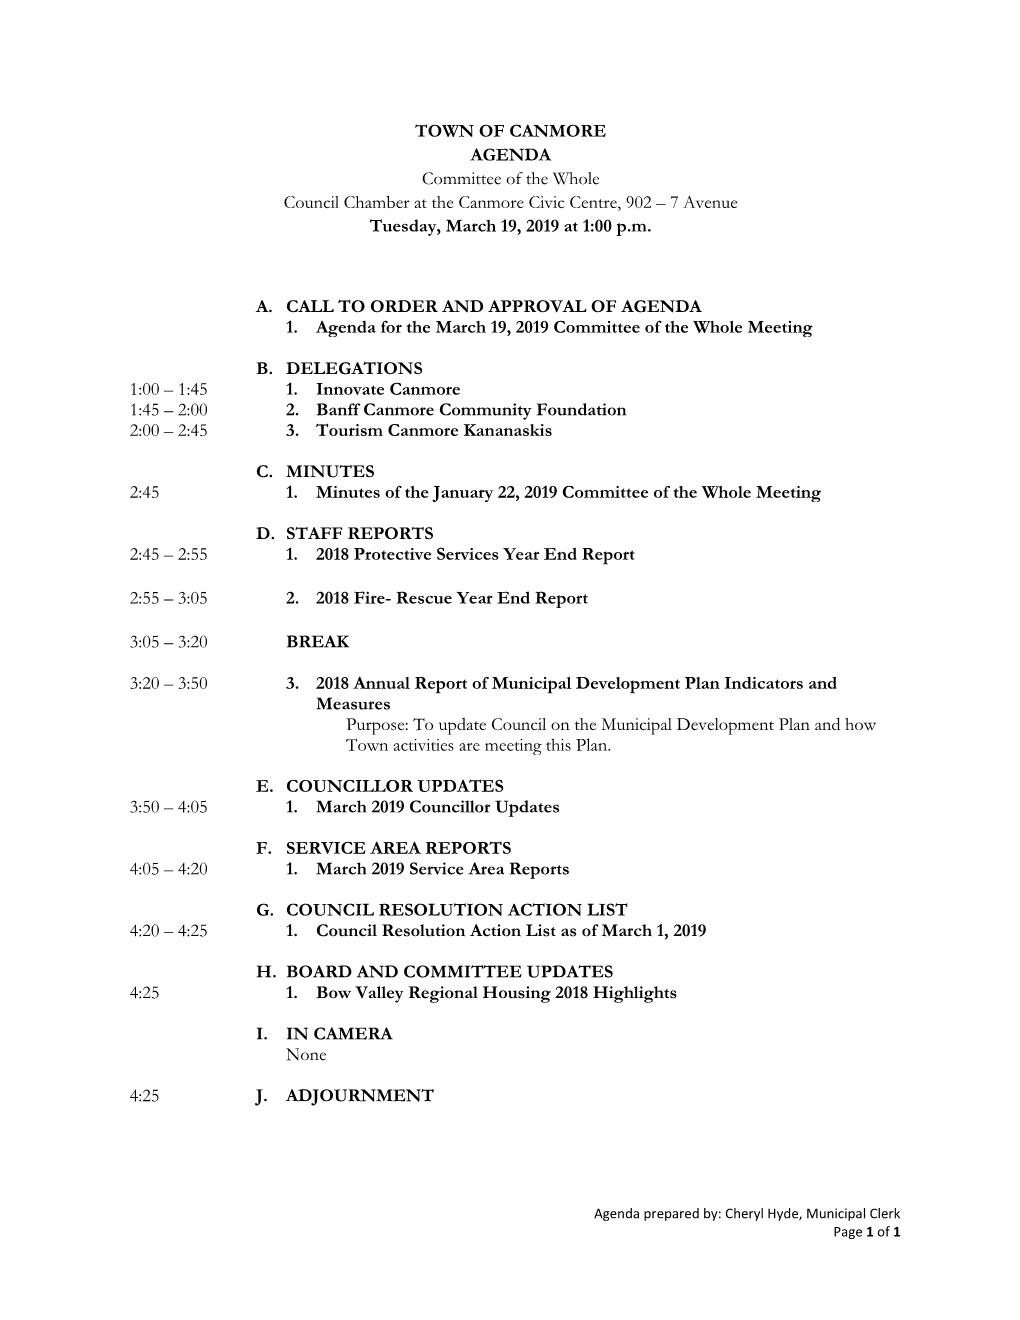 TOWN of CANMORE AGENDA Committee of the Whole Council Chamber at the Canmore Civic Centre, 902 – 7 Avenue Tuesday, March 19, 2019 at 1:00 P.M